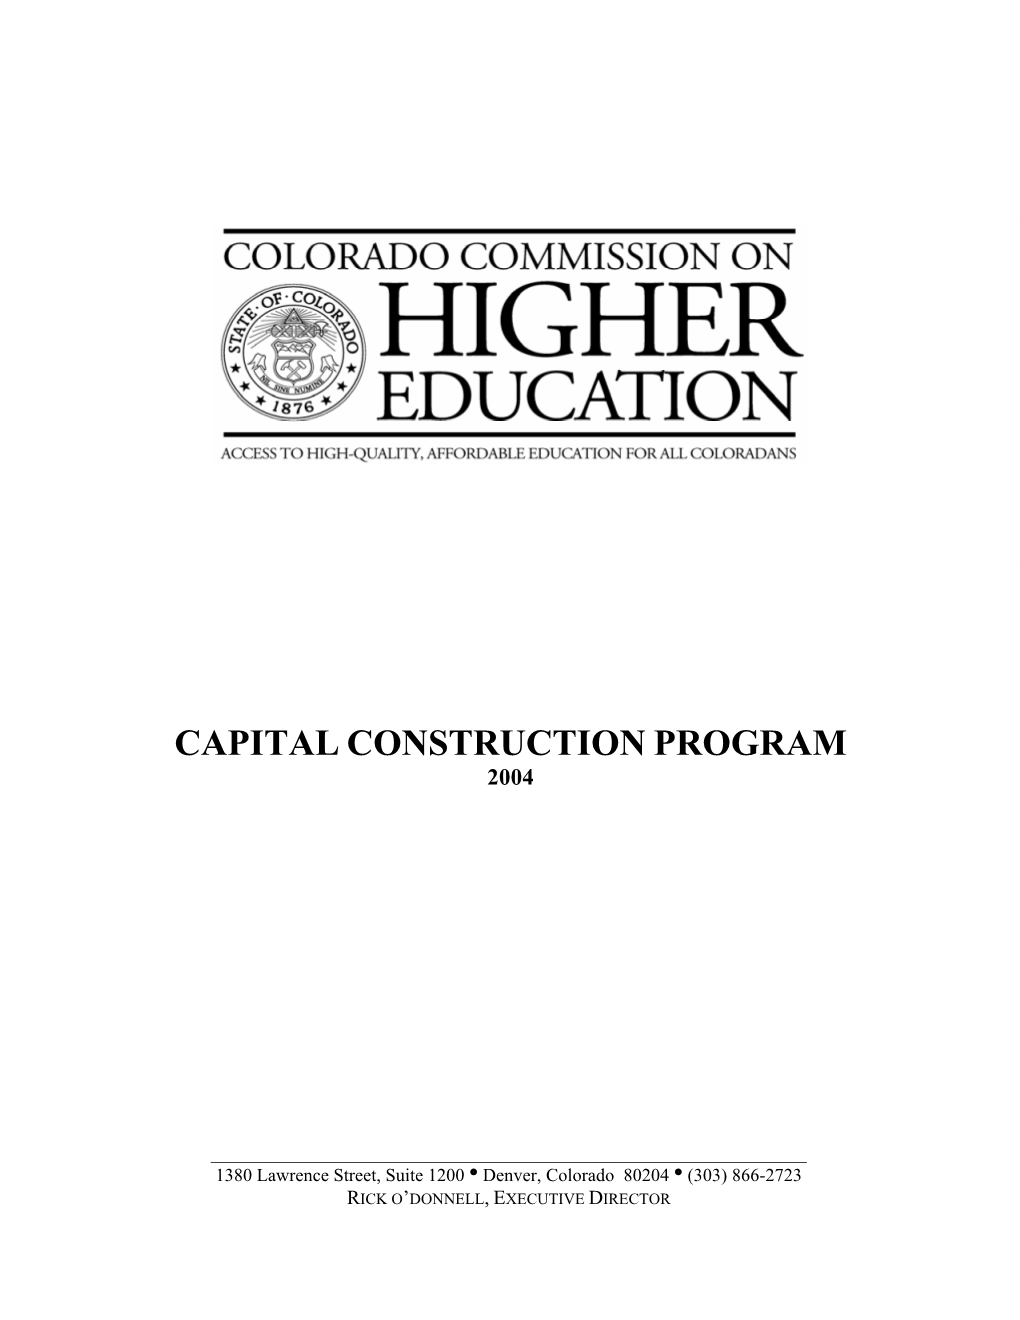 The Colorado Commission on Higher Education (CCHE) Is Composed of 11 Members Appointed by the Governor and Confirmed by the State Senate